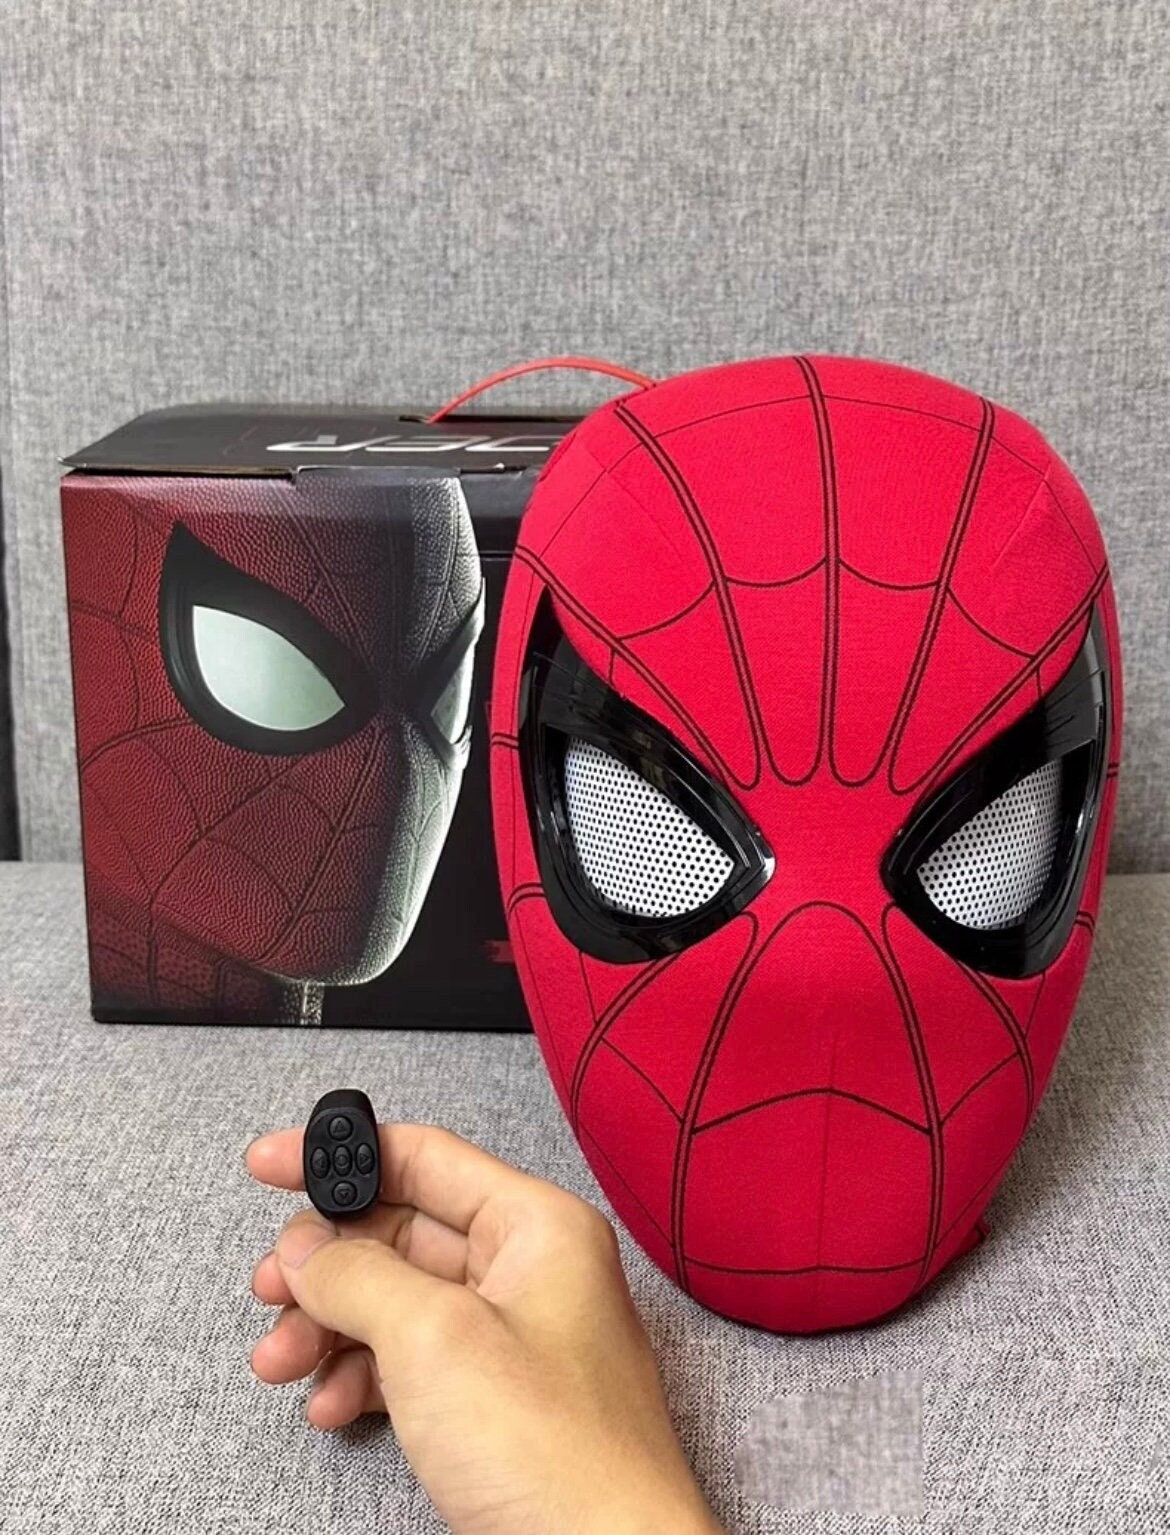 LIPUDAPP Incroyable Masque Spiderman Adultes Couvre-Chef